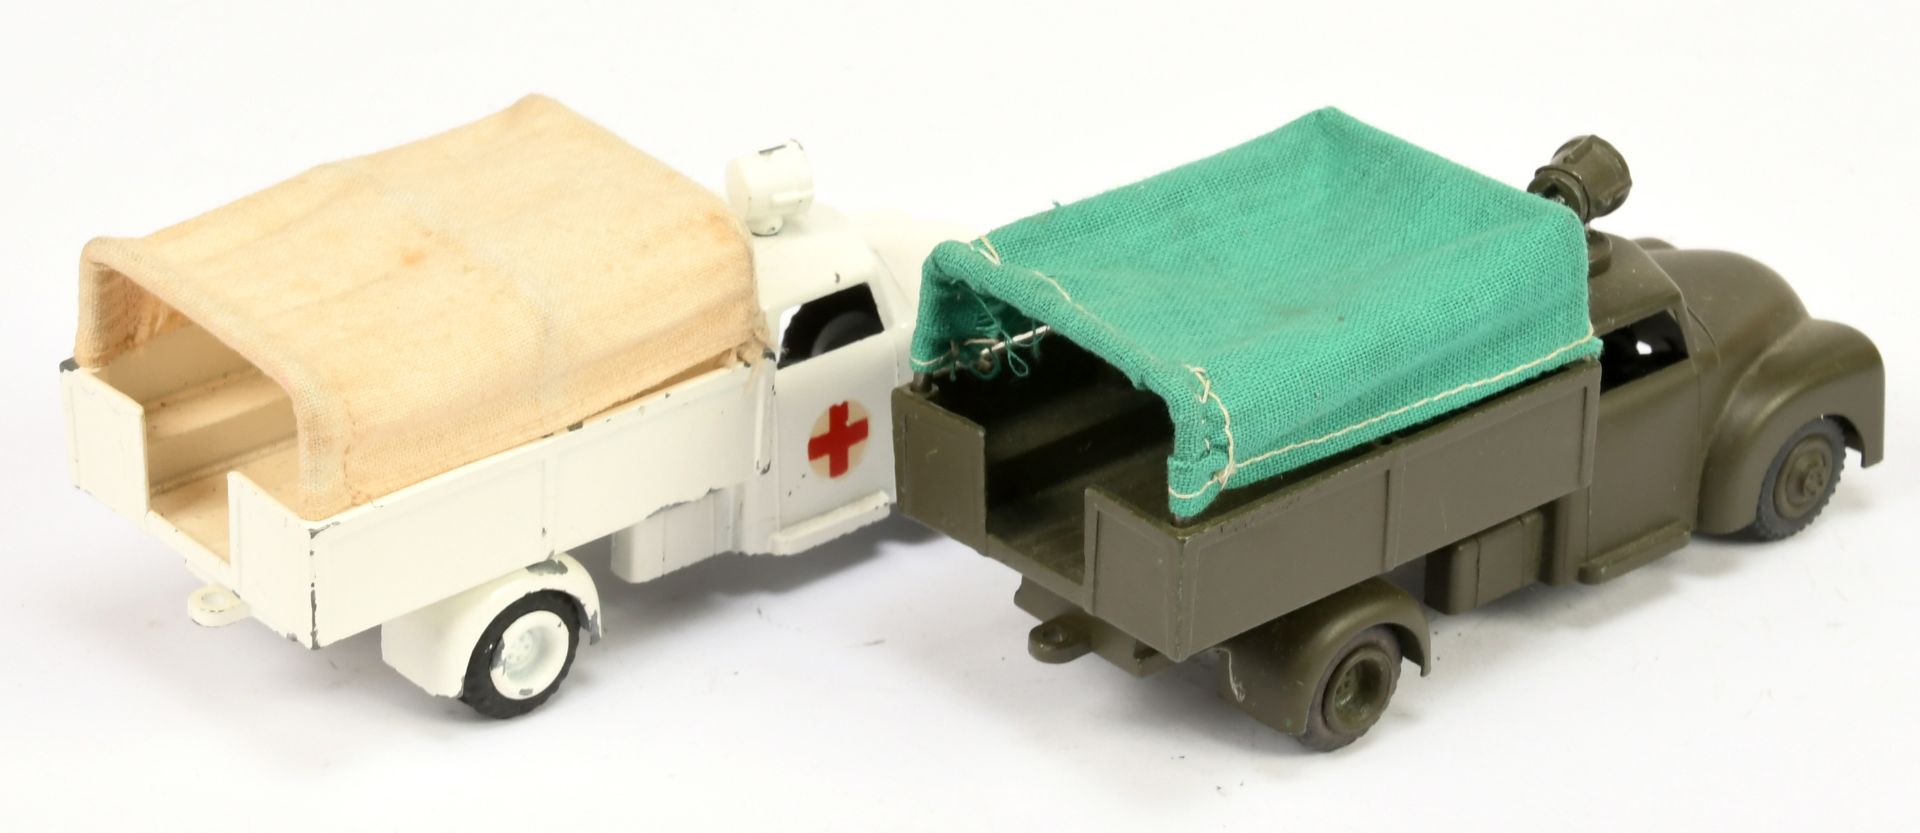 Tekno Military dodge lorry "Ambulance" pair unboxed - (1) white body and cloth canopy  - Image 2 of 2